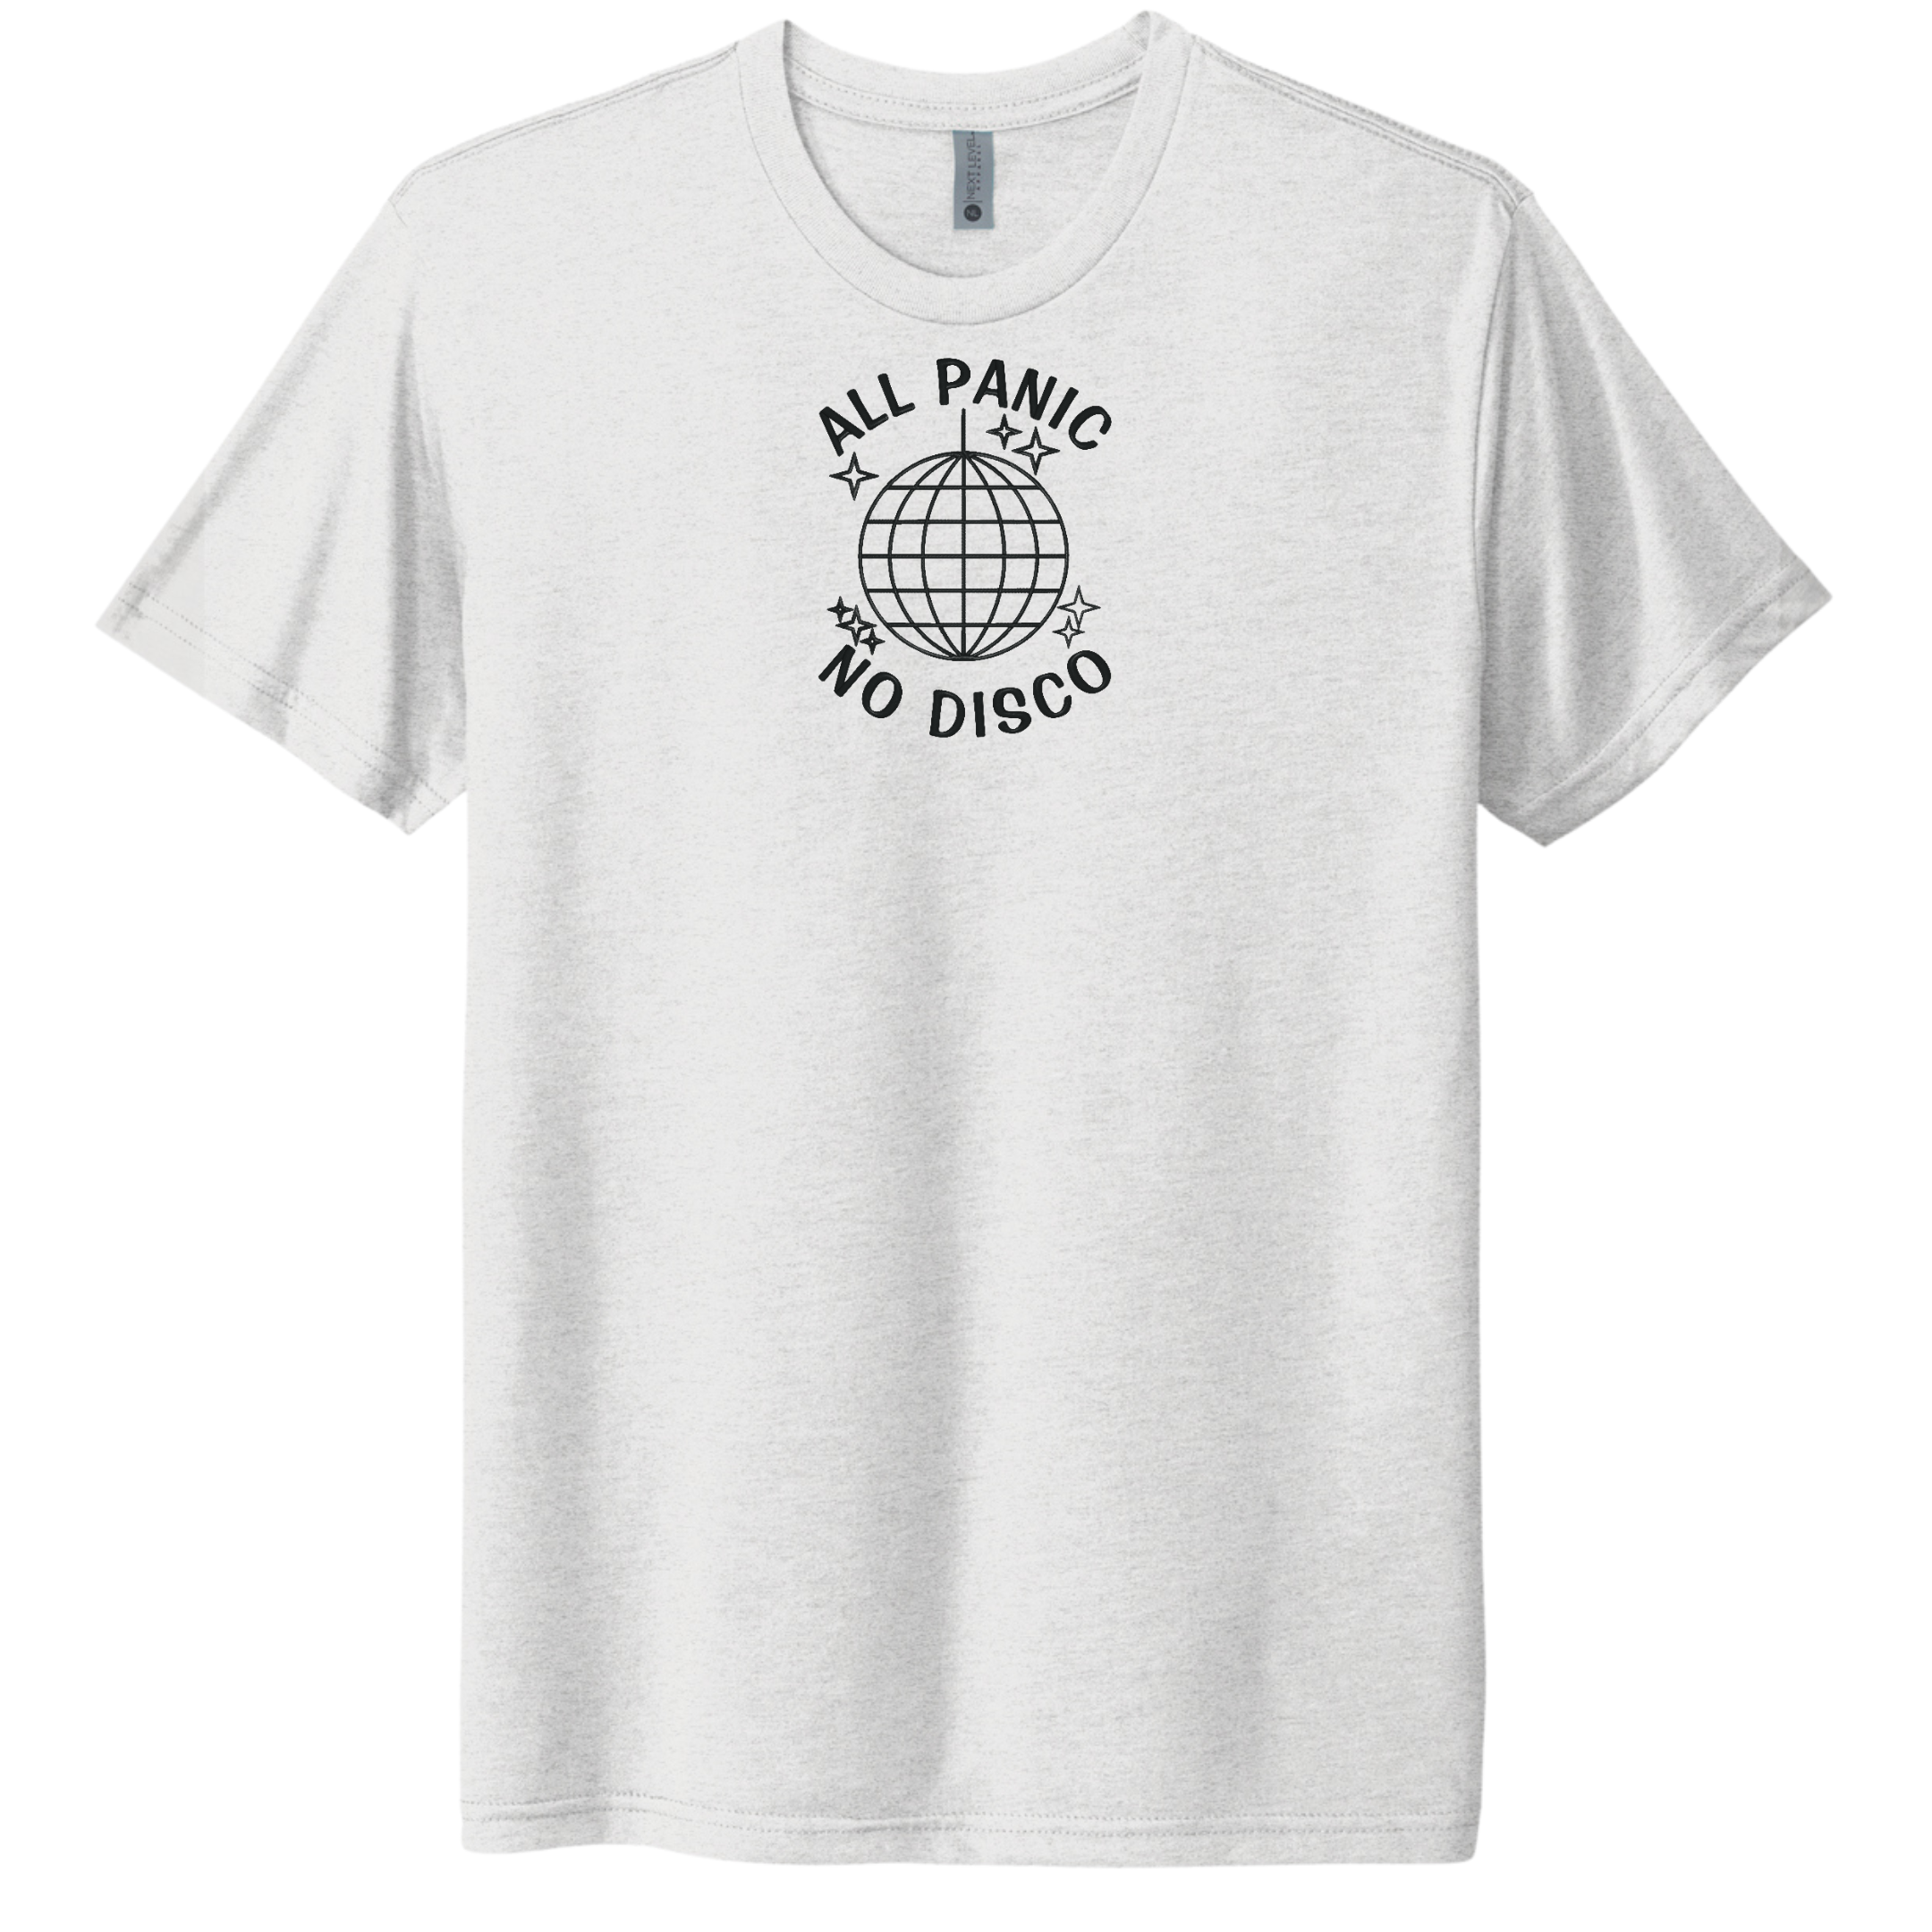 All Panic No Disco Embroidered Tee Shirt, Unisex